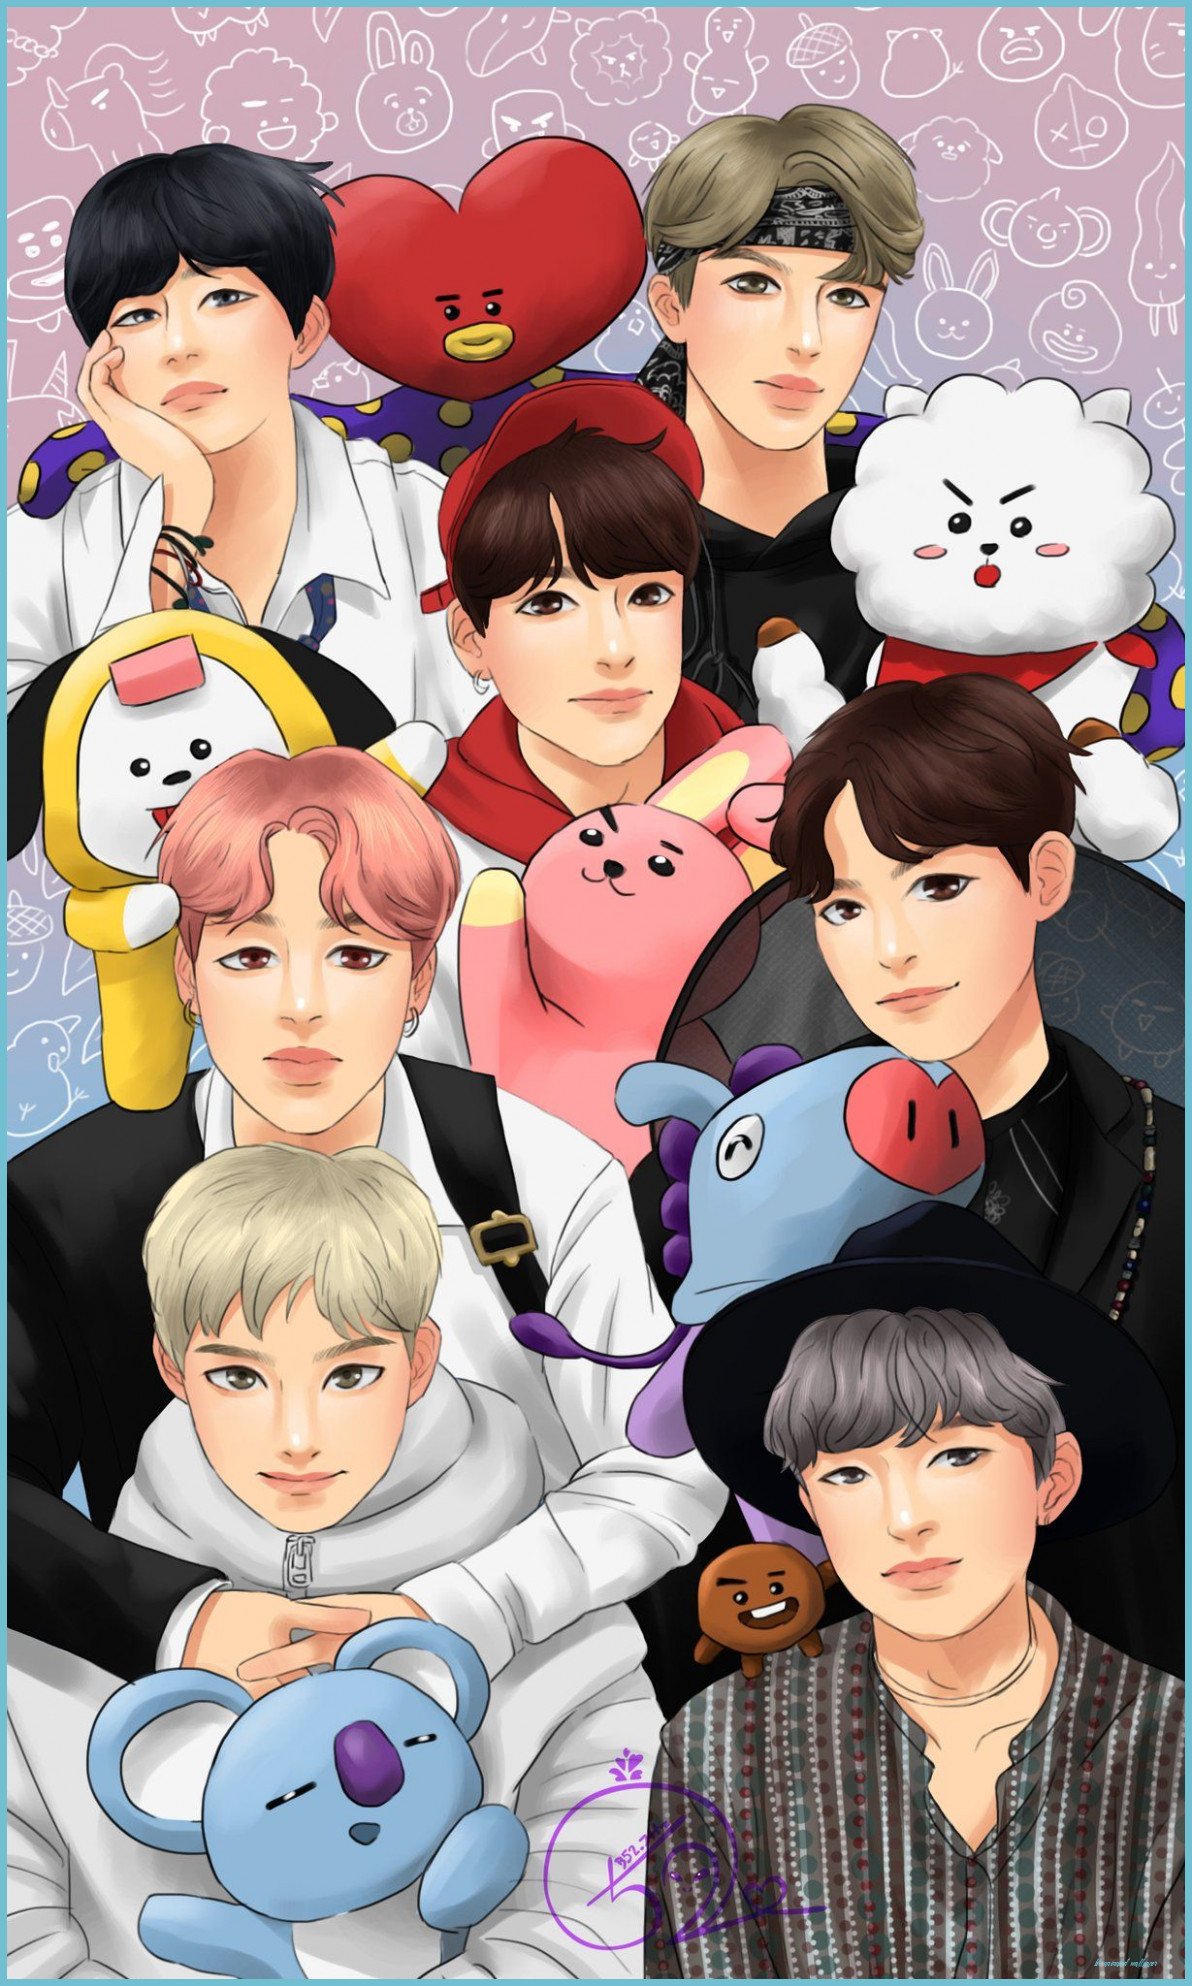 Bts Animated Wallpaper Free Bts Animated Background